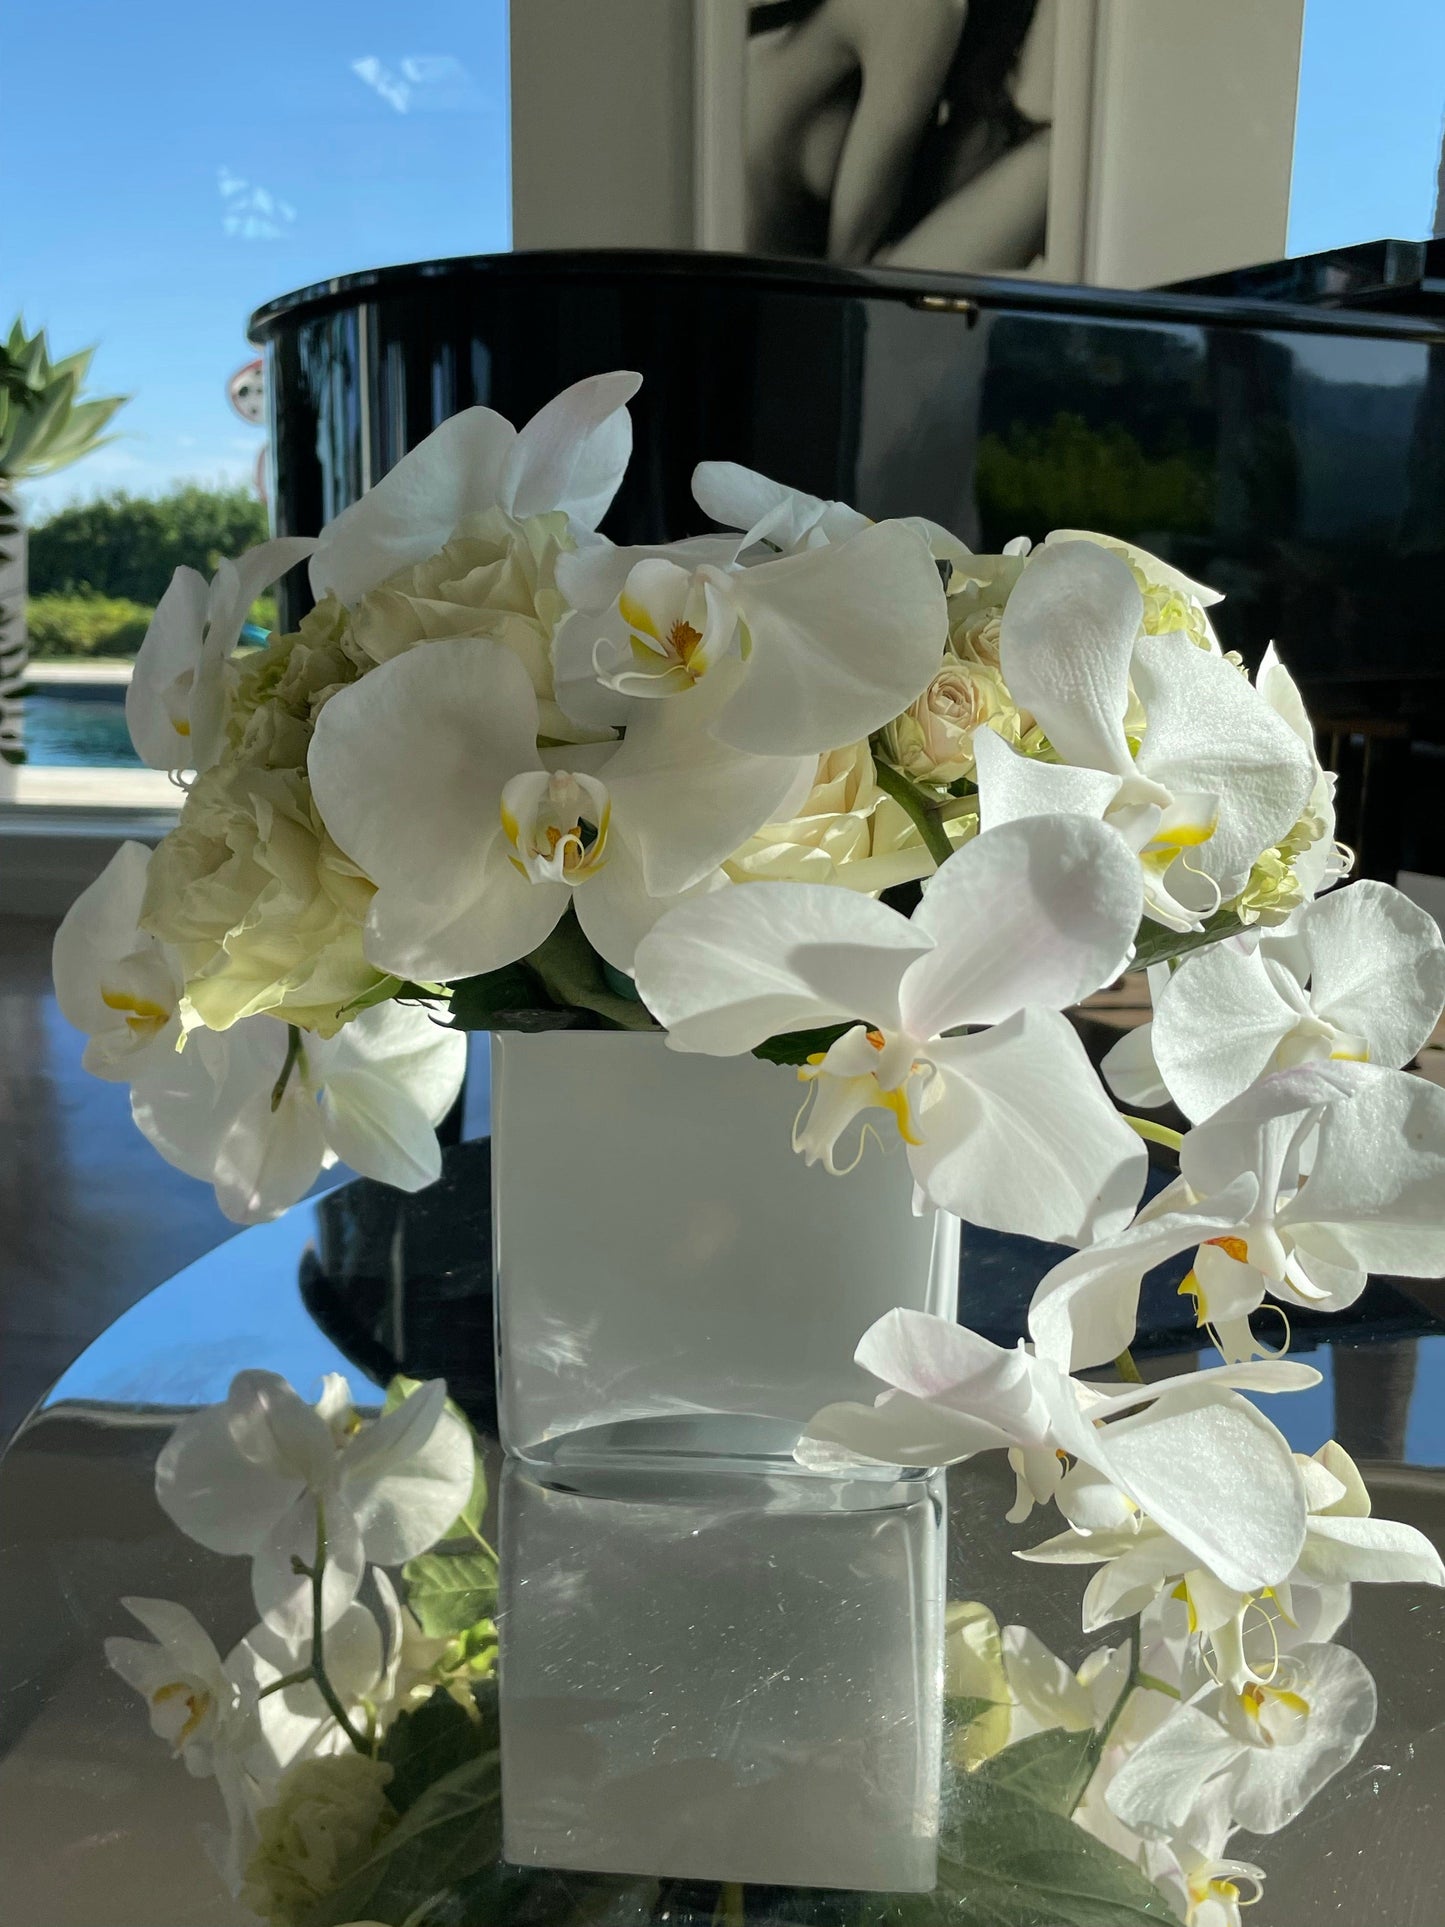 White orchids with white roses in a medium vase